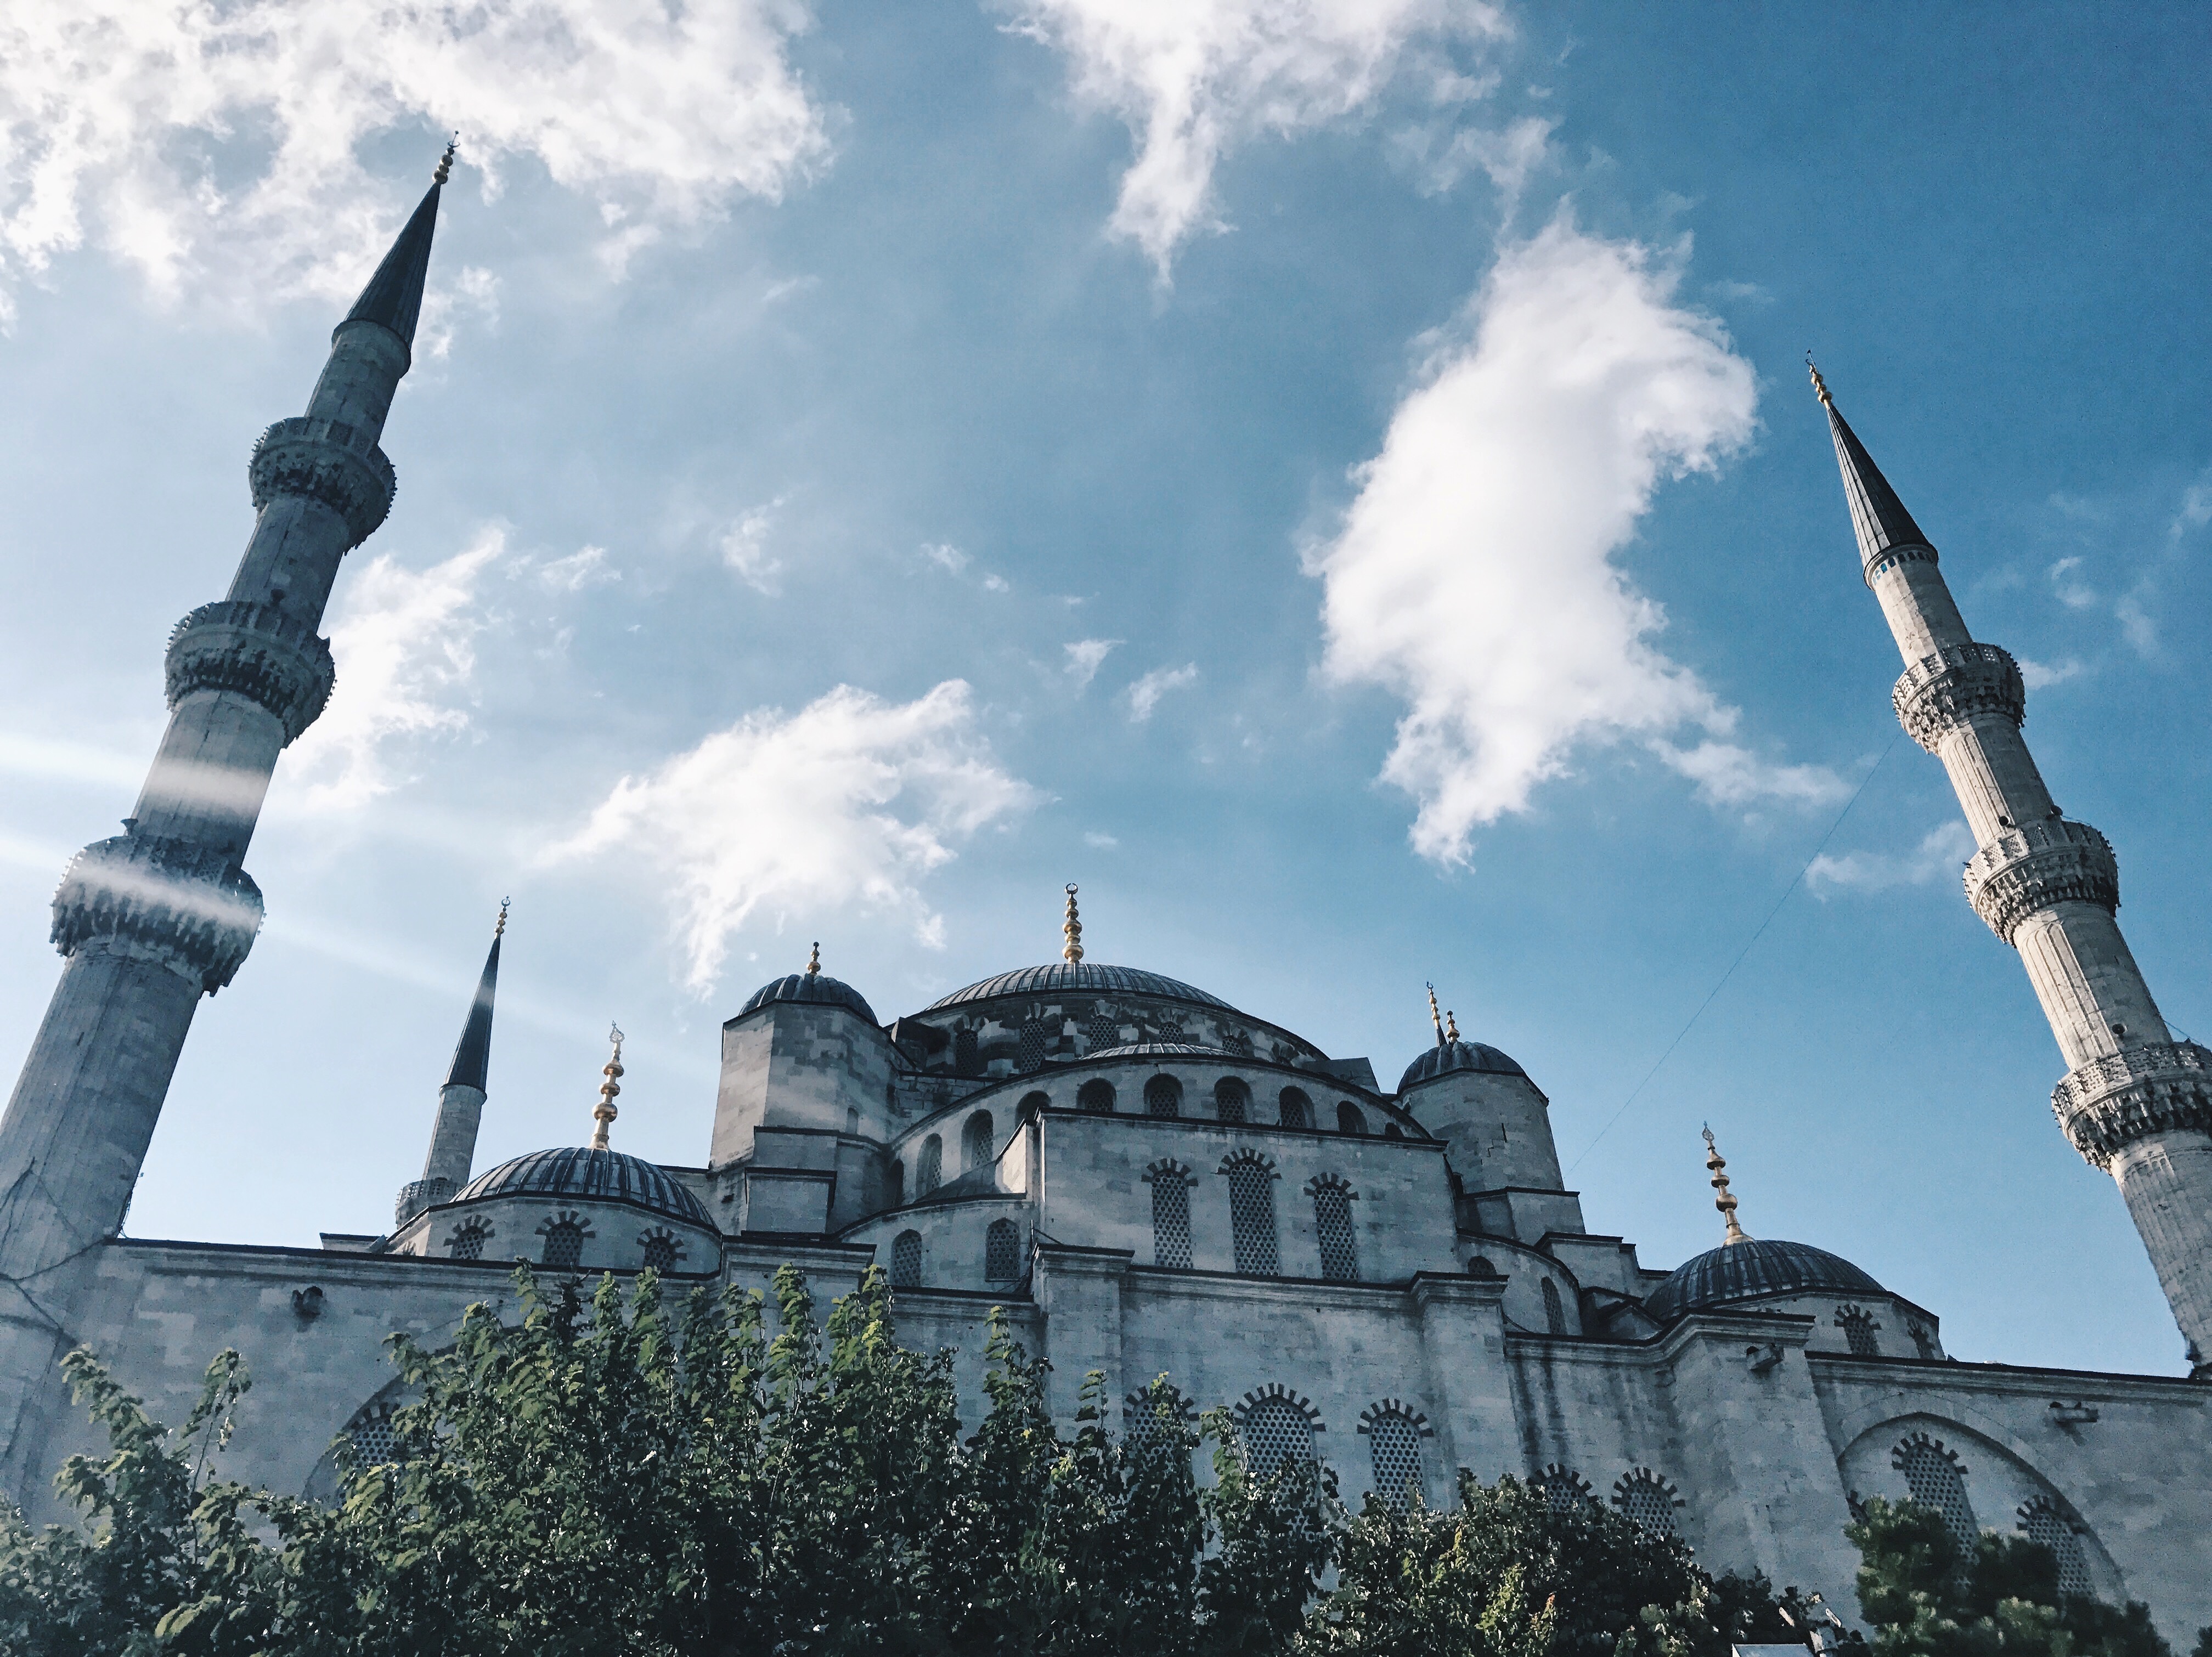 Hagia Sophia in Istanbul - Photo made by Nisa Hilal from Peonycrescent